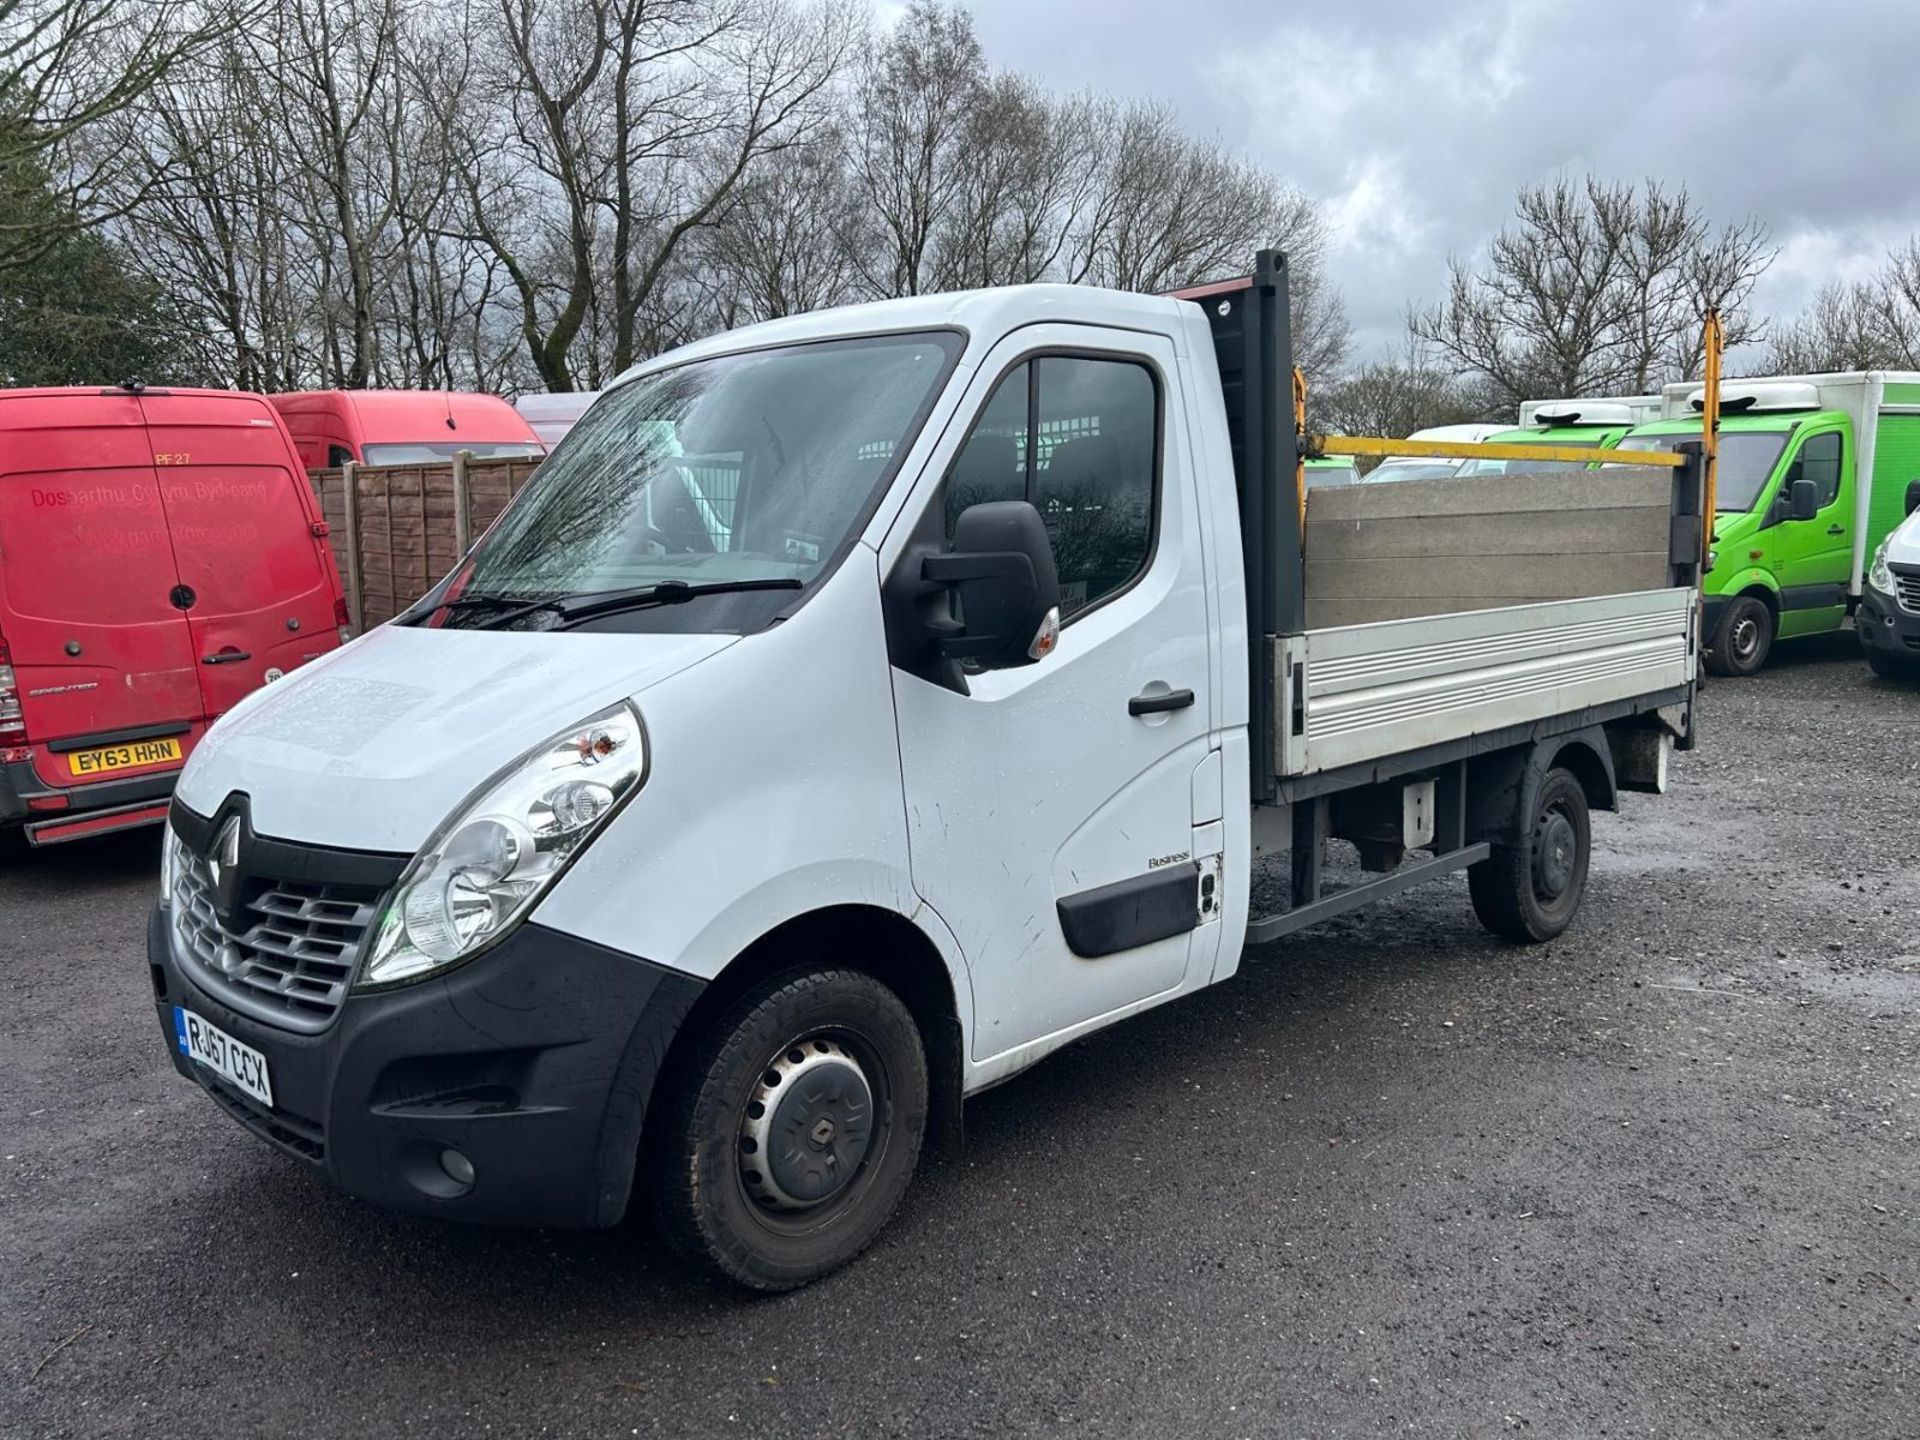 2018 RENAULT MASTER ML35 BUSINESS DCI 125: RELIABLE DIESEL DROPSIDE WITH TAIL LIFT - Image 2 of 13